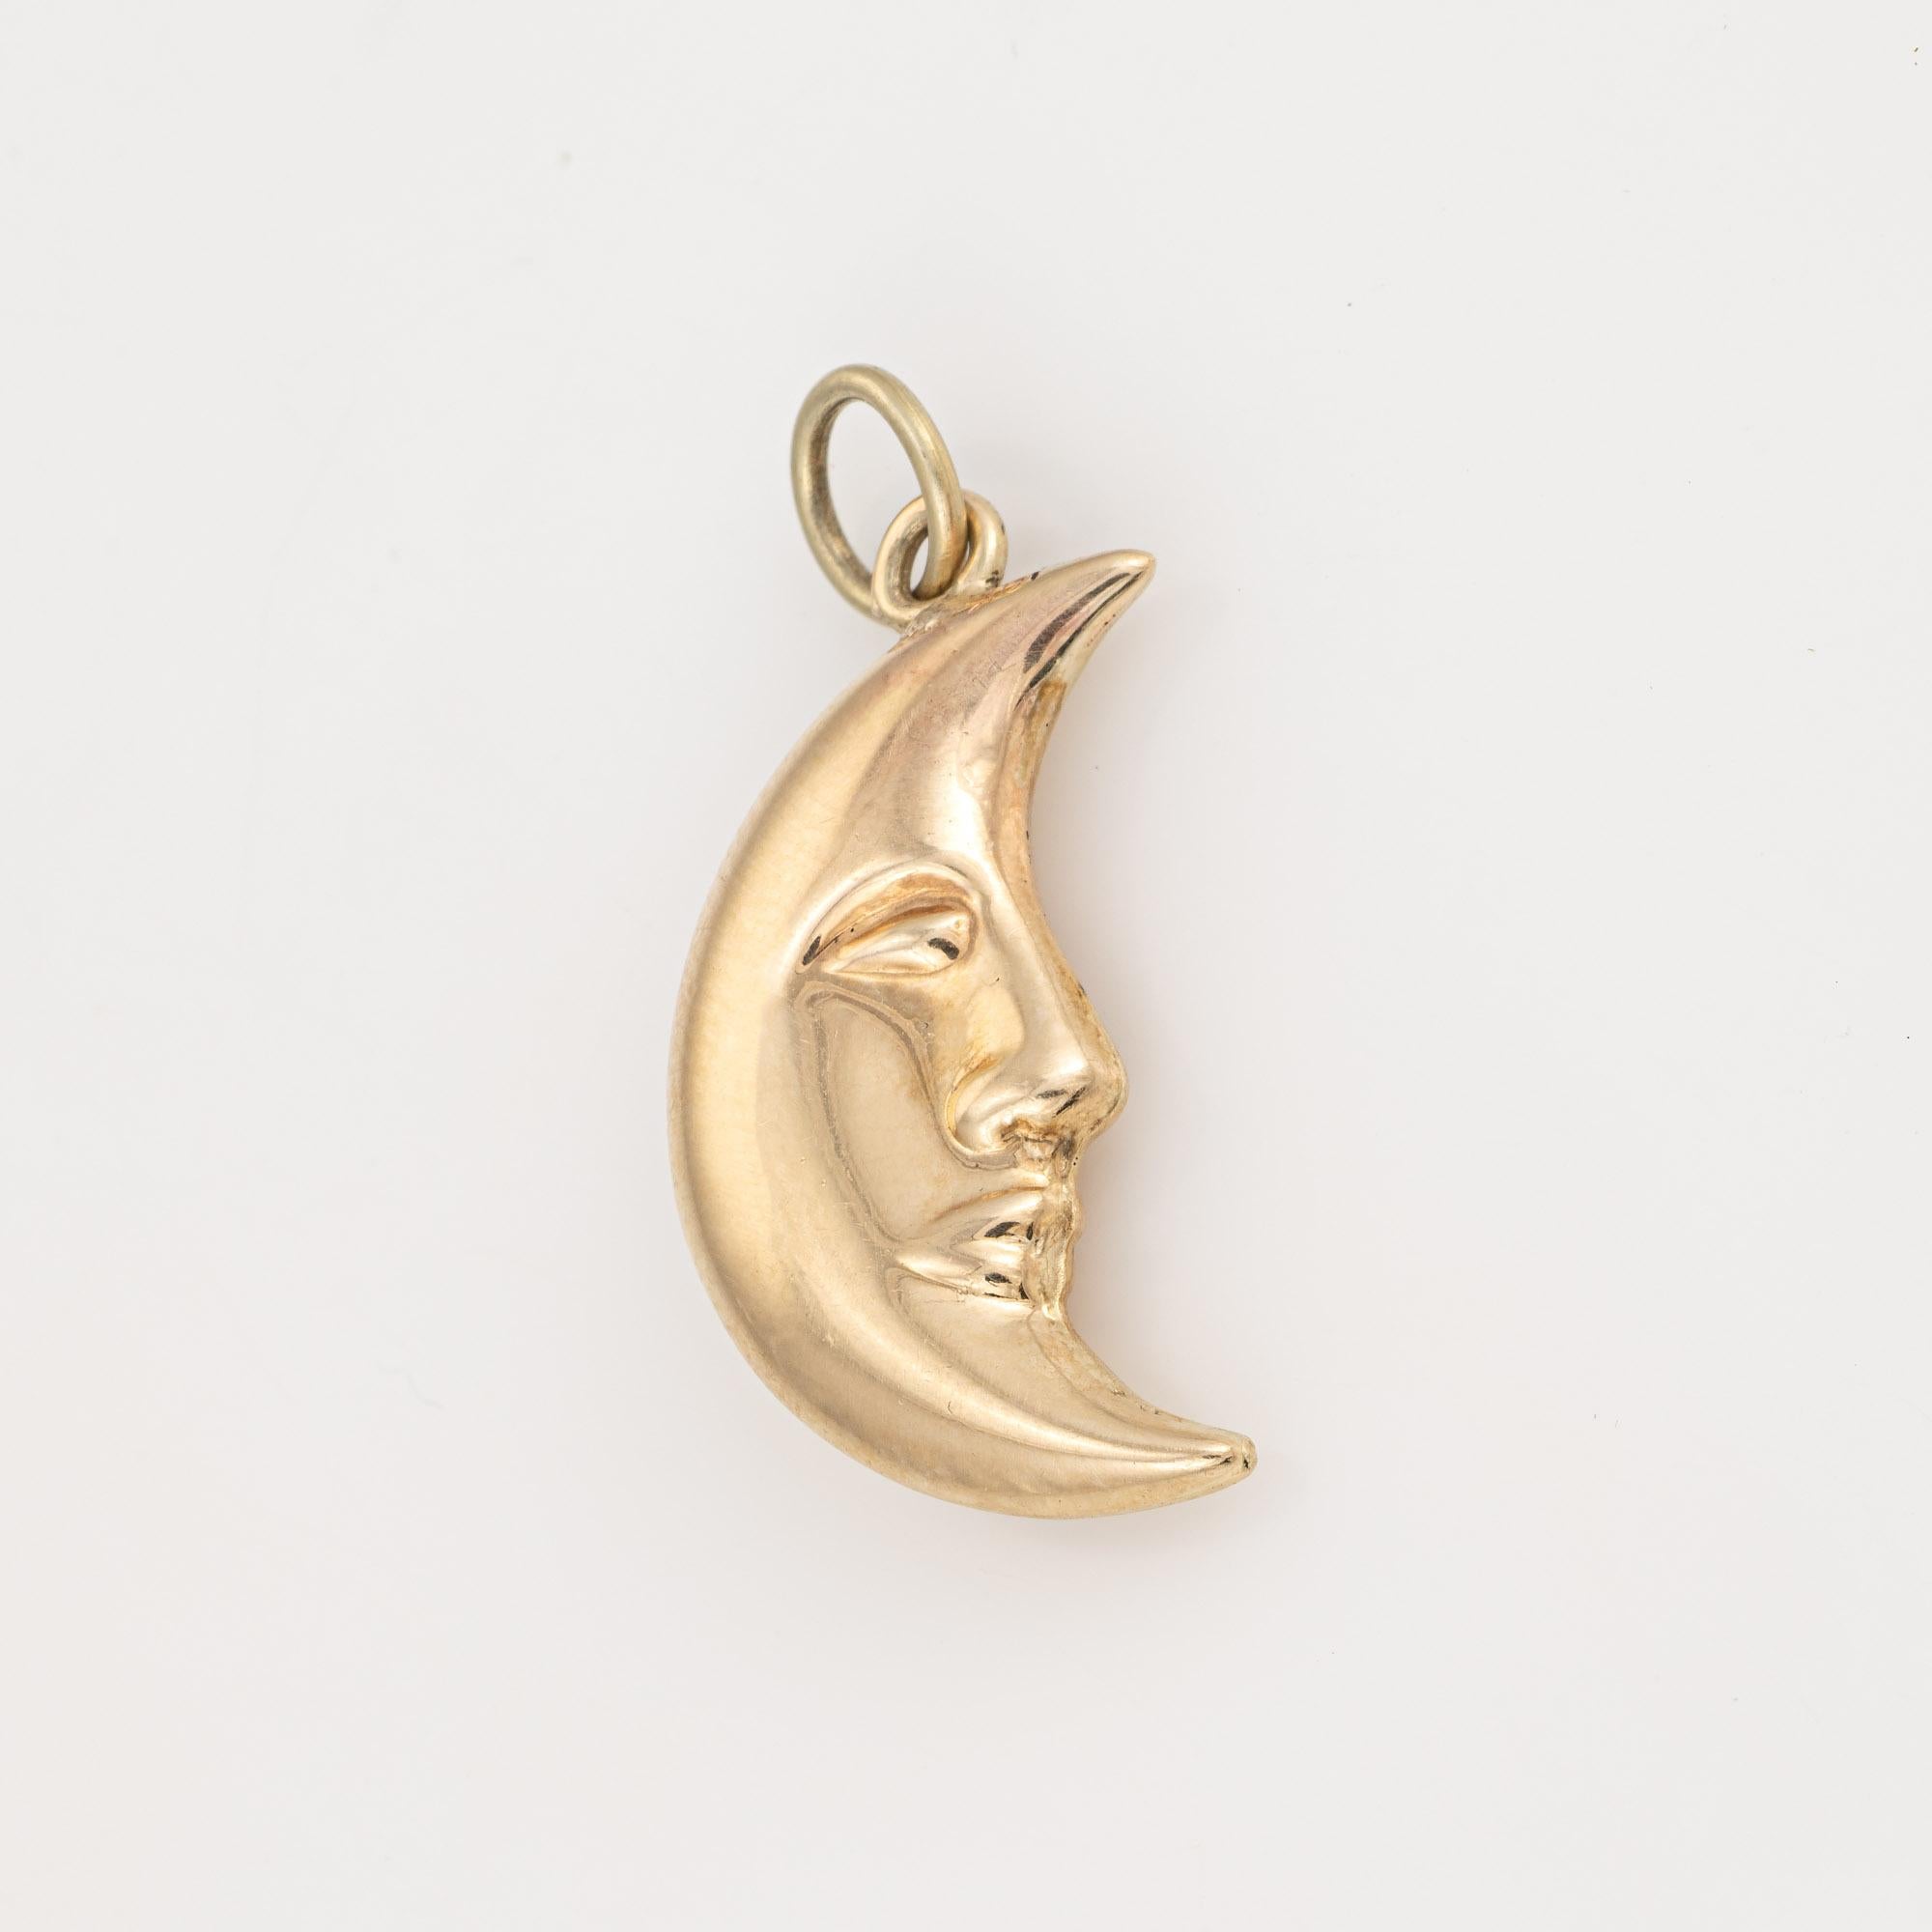 Finely detailed Man in the Moon charm crafted in 18k yellow gold.  

The nicely detailed charm is rendered in lifelike detail with the image of the Man in the Moon appearing on both sides. The hollow charm has a lightweight feel to the touch at 1.6